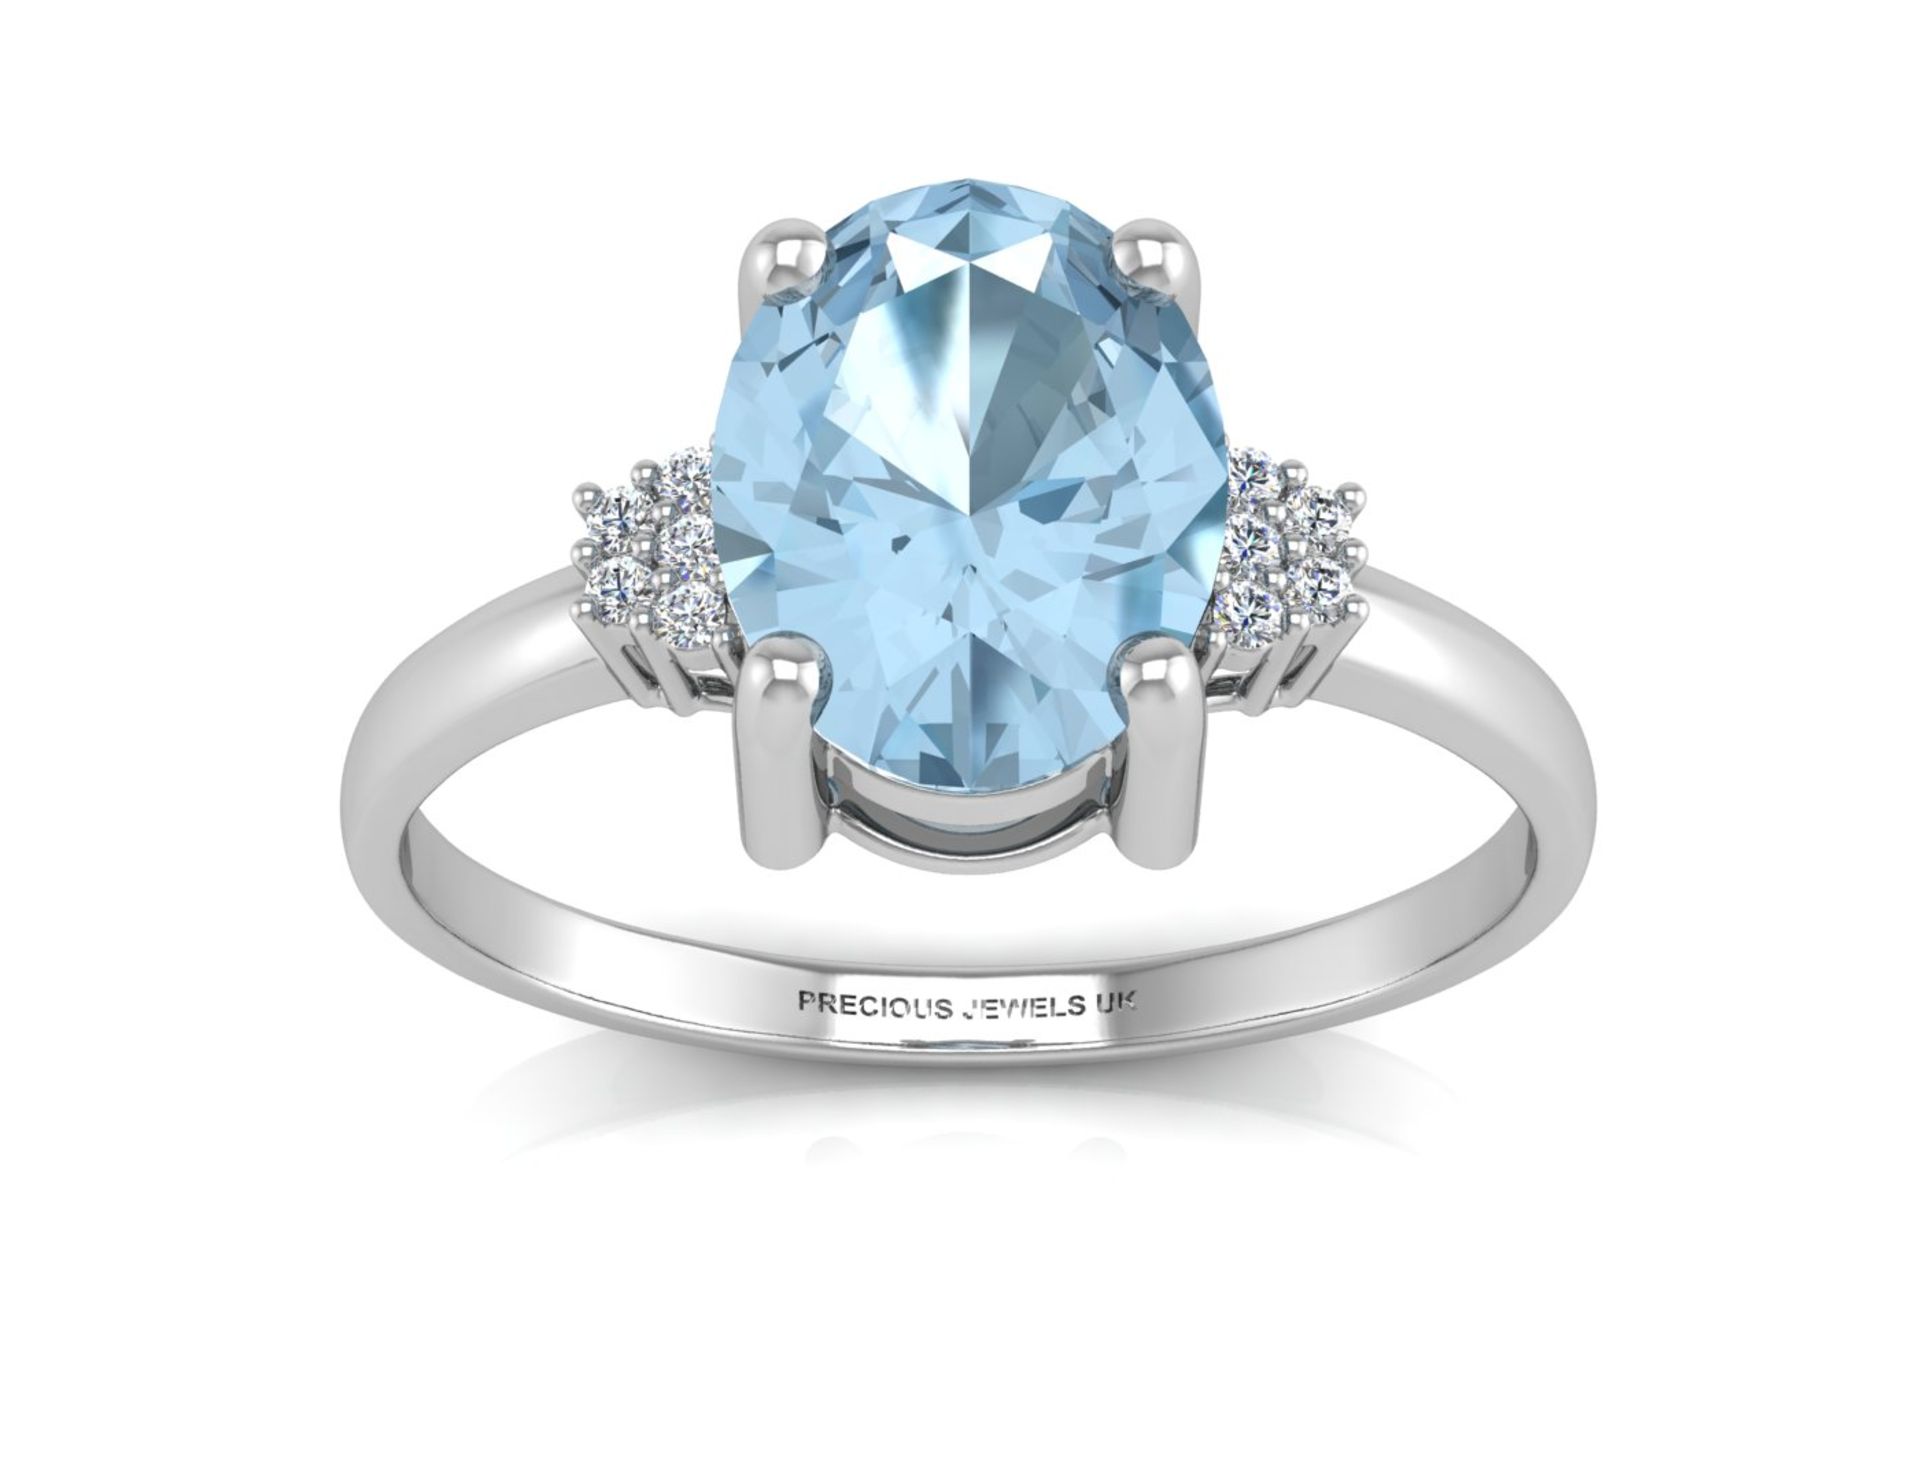 9k White Gold Diamond And Blue Topaz Ring 0.03 Carats - Image 3 of 5